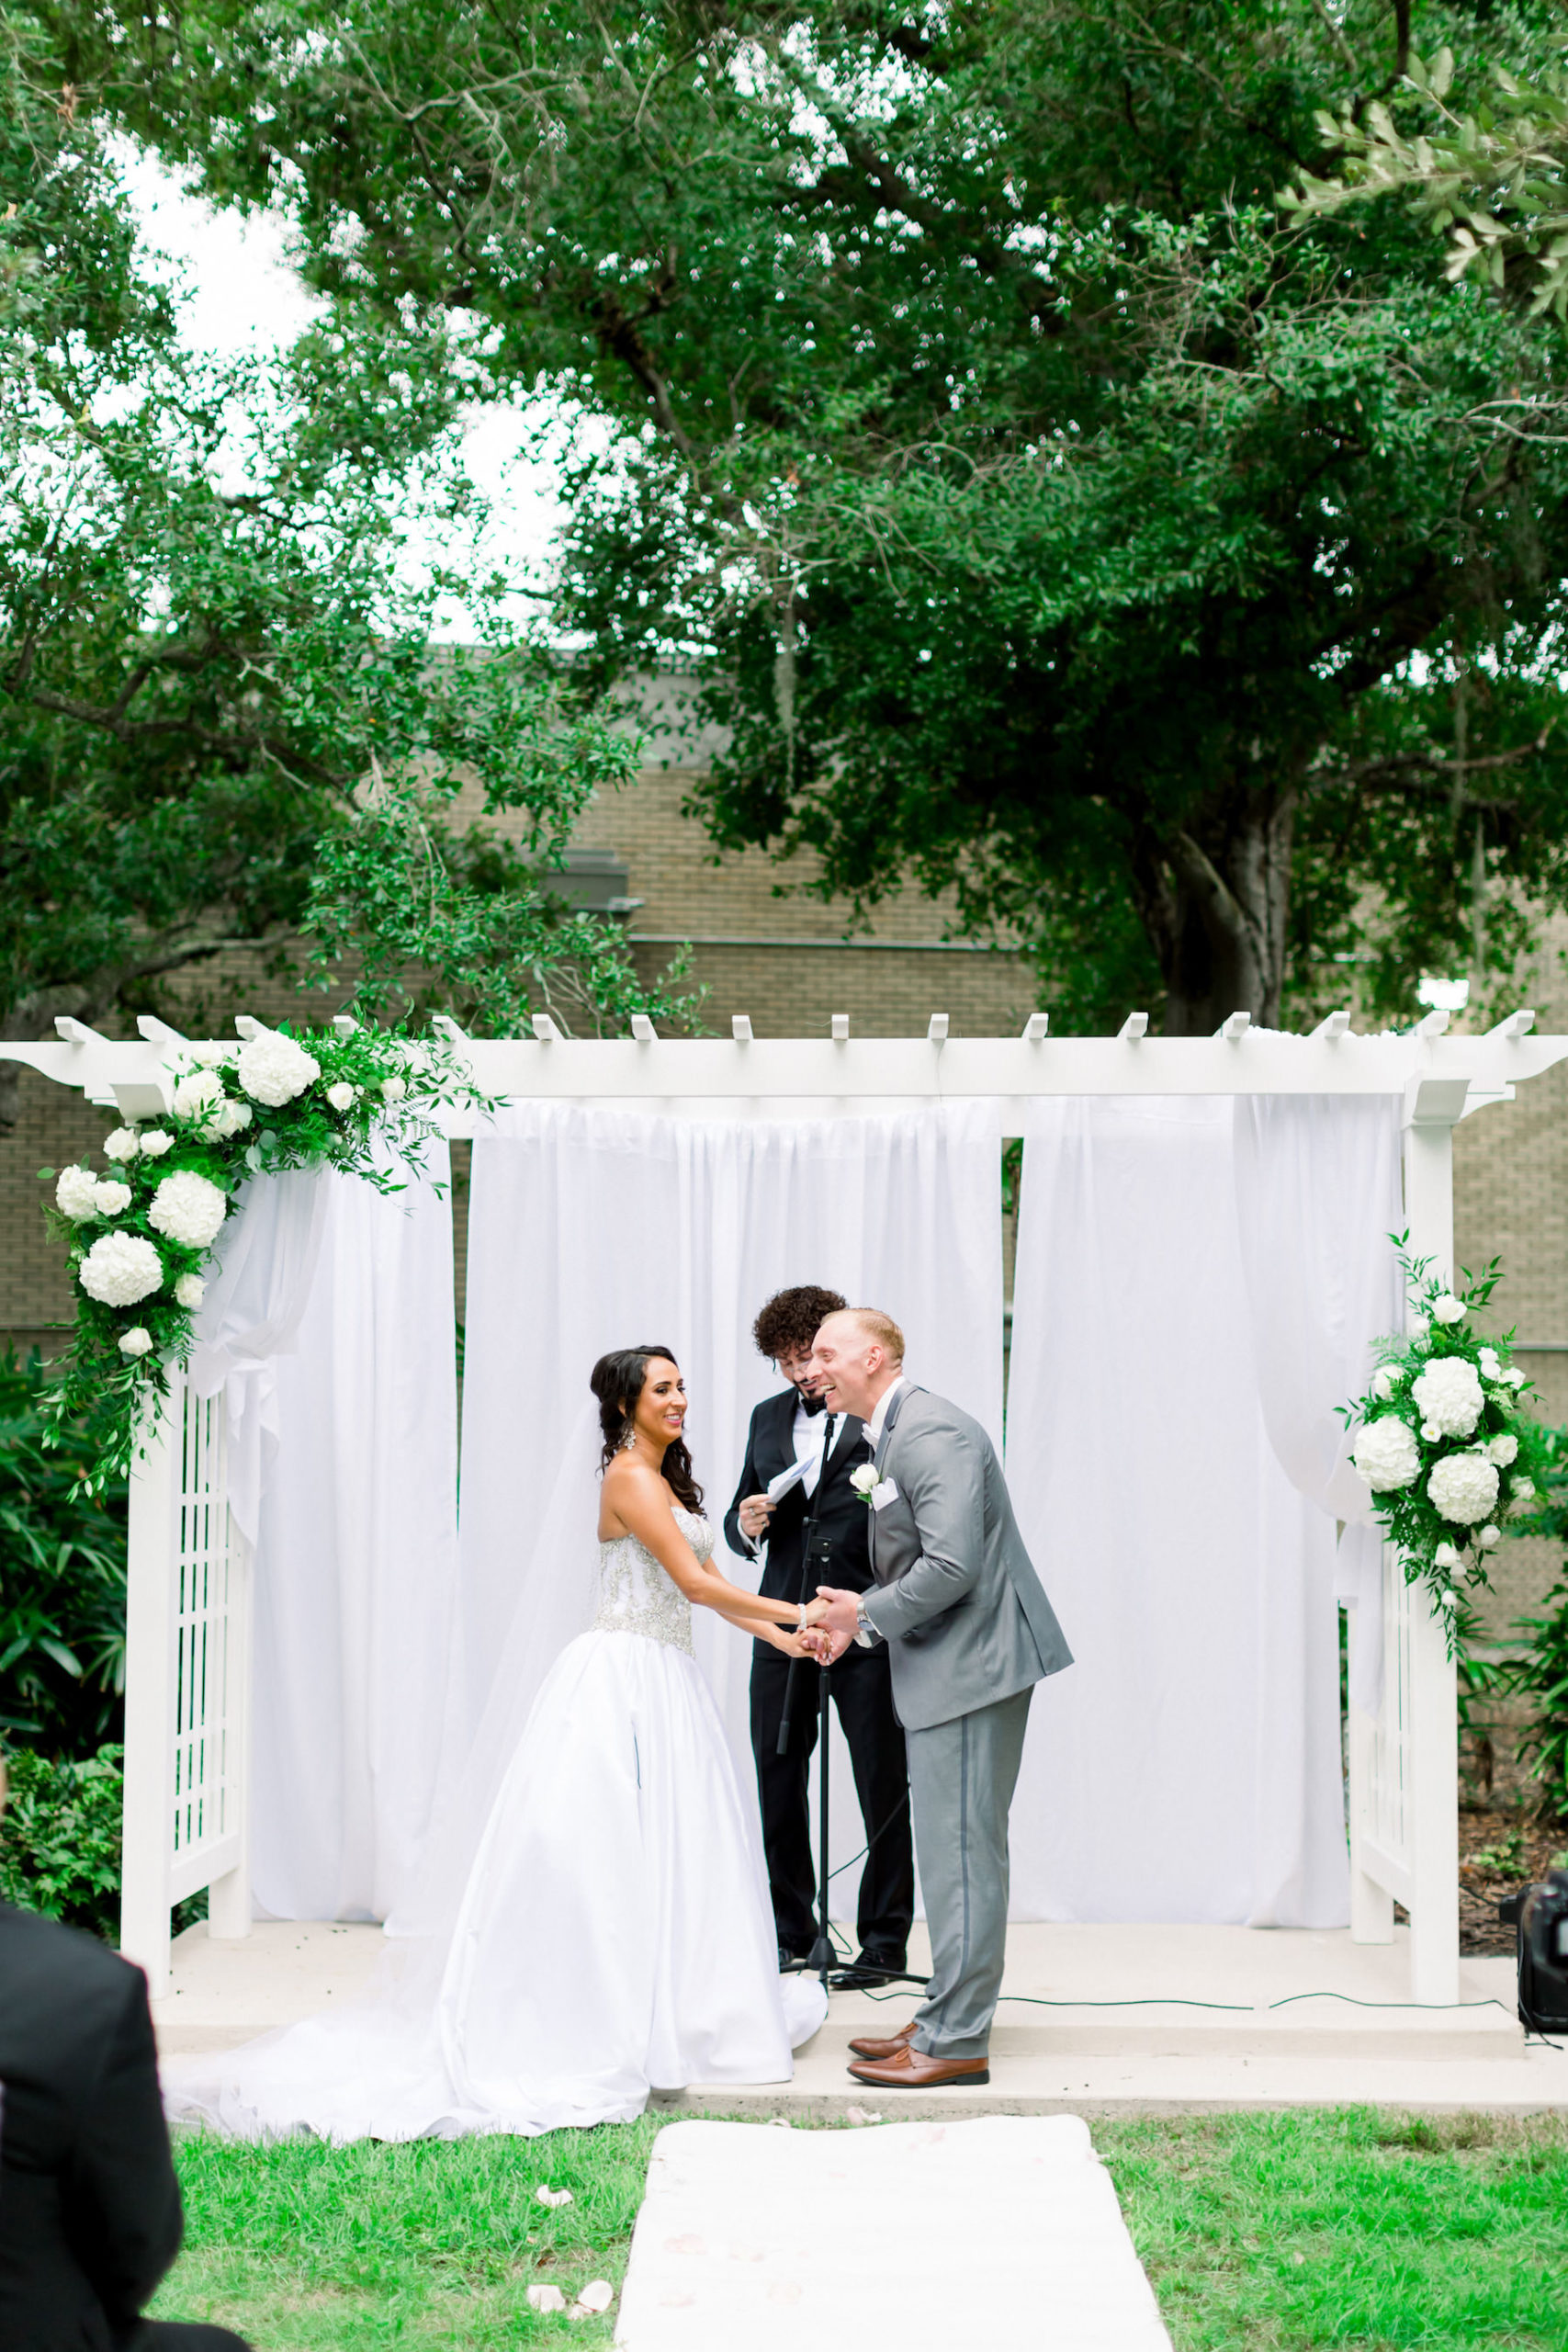 Romantic Bride and Groom Exchanging Vows Wedding Ceremony Portrait Under White Arbor Arch with Hydrangeas and Greenery Floral Arrangements and White Draping | Wedding Venue Tampa Garden Club | Wedding Photographer Shauna and Jordon Photography | Wedding Dress Truly Forever Bridal